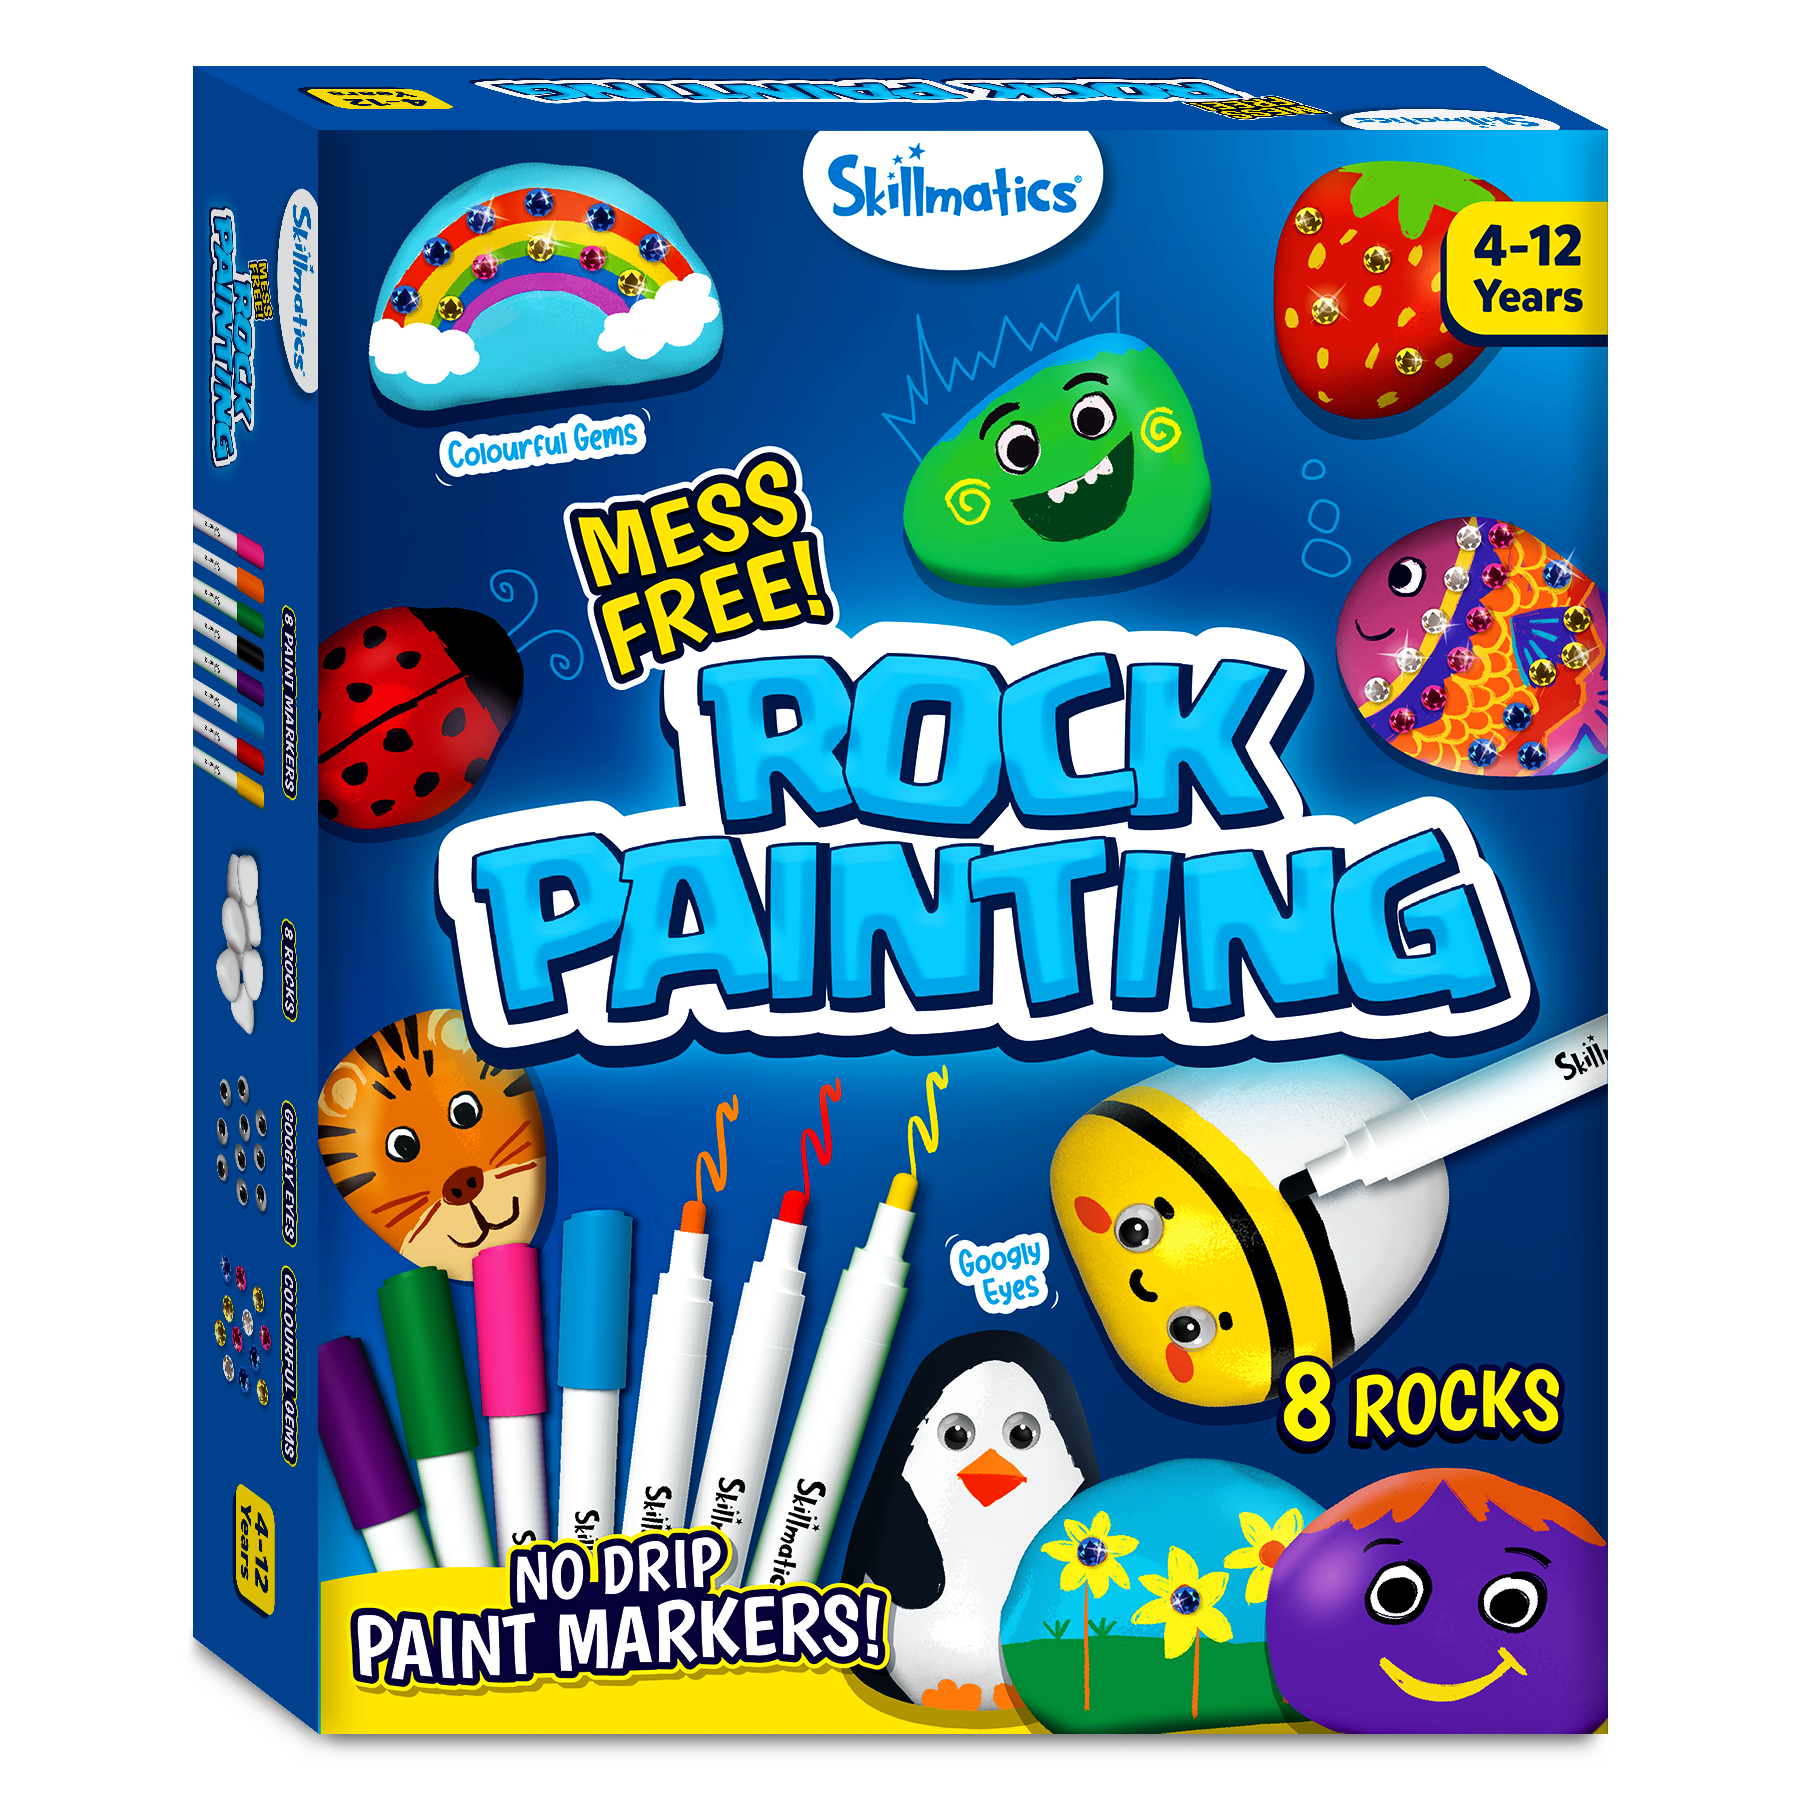 Skillmatics Rock Painting Kit - Mess-Free Art & Craft Activity for Girls & Boys, Craft Kits & Supplies, DIY Creative Activity, Gifts for Kids Ages 4 to 12